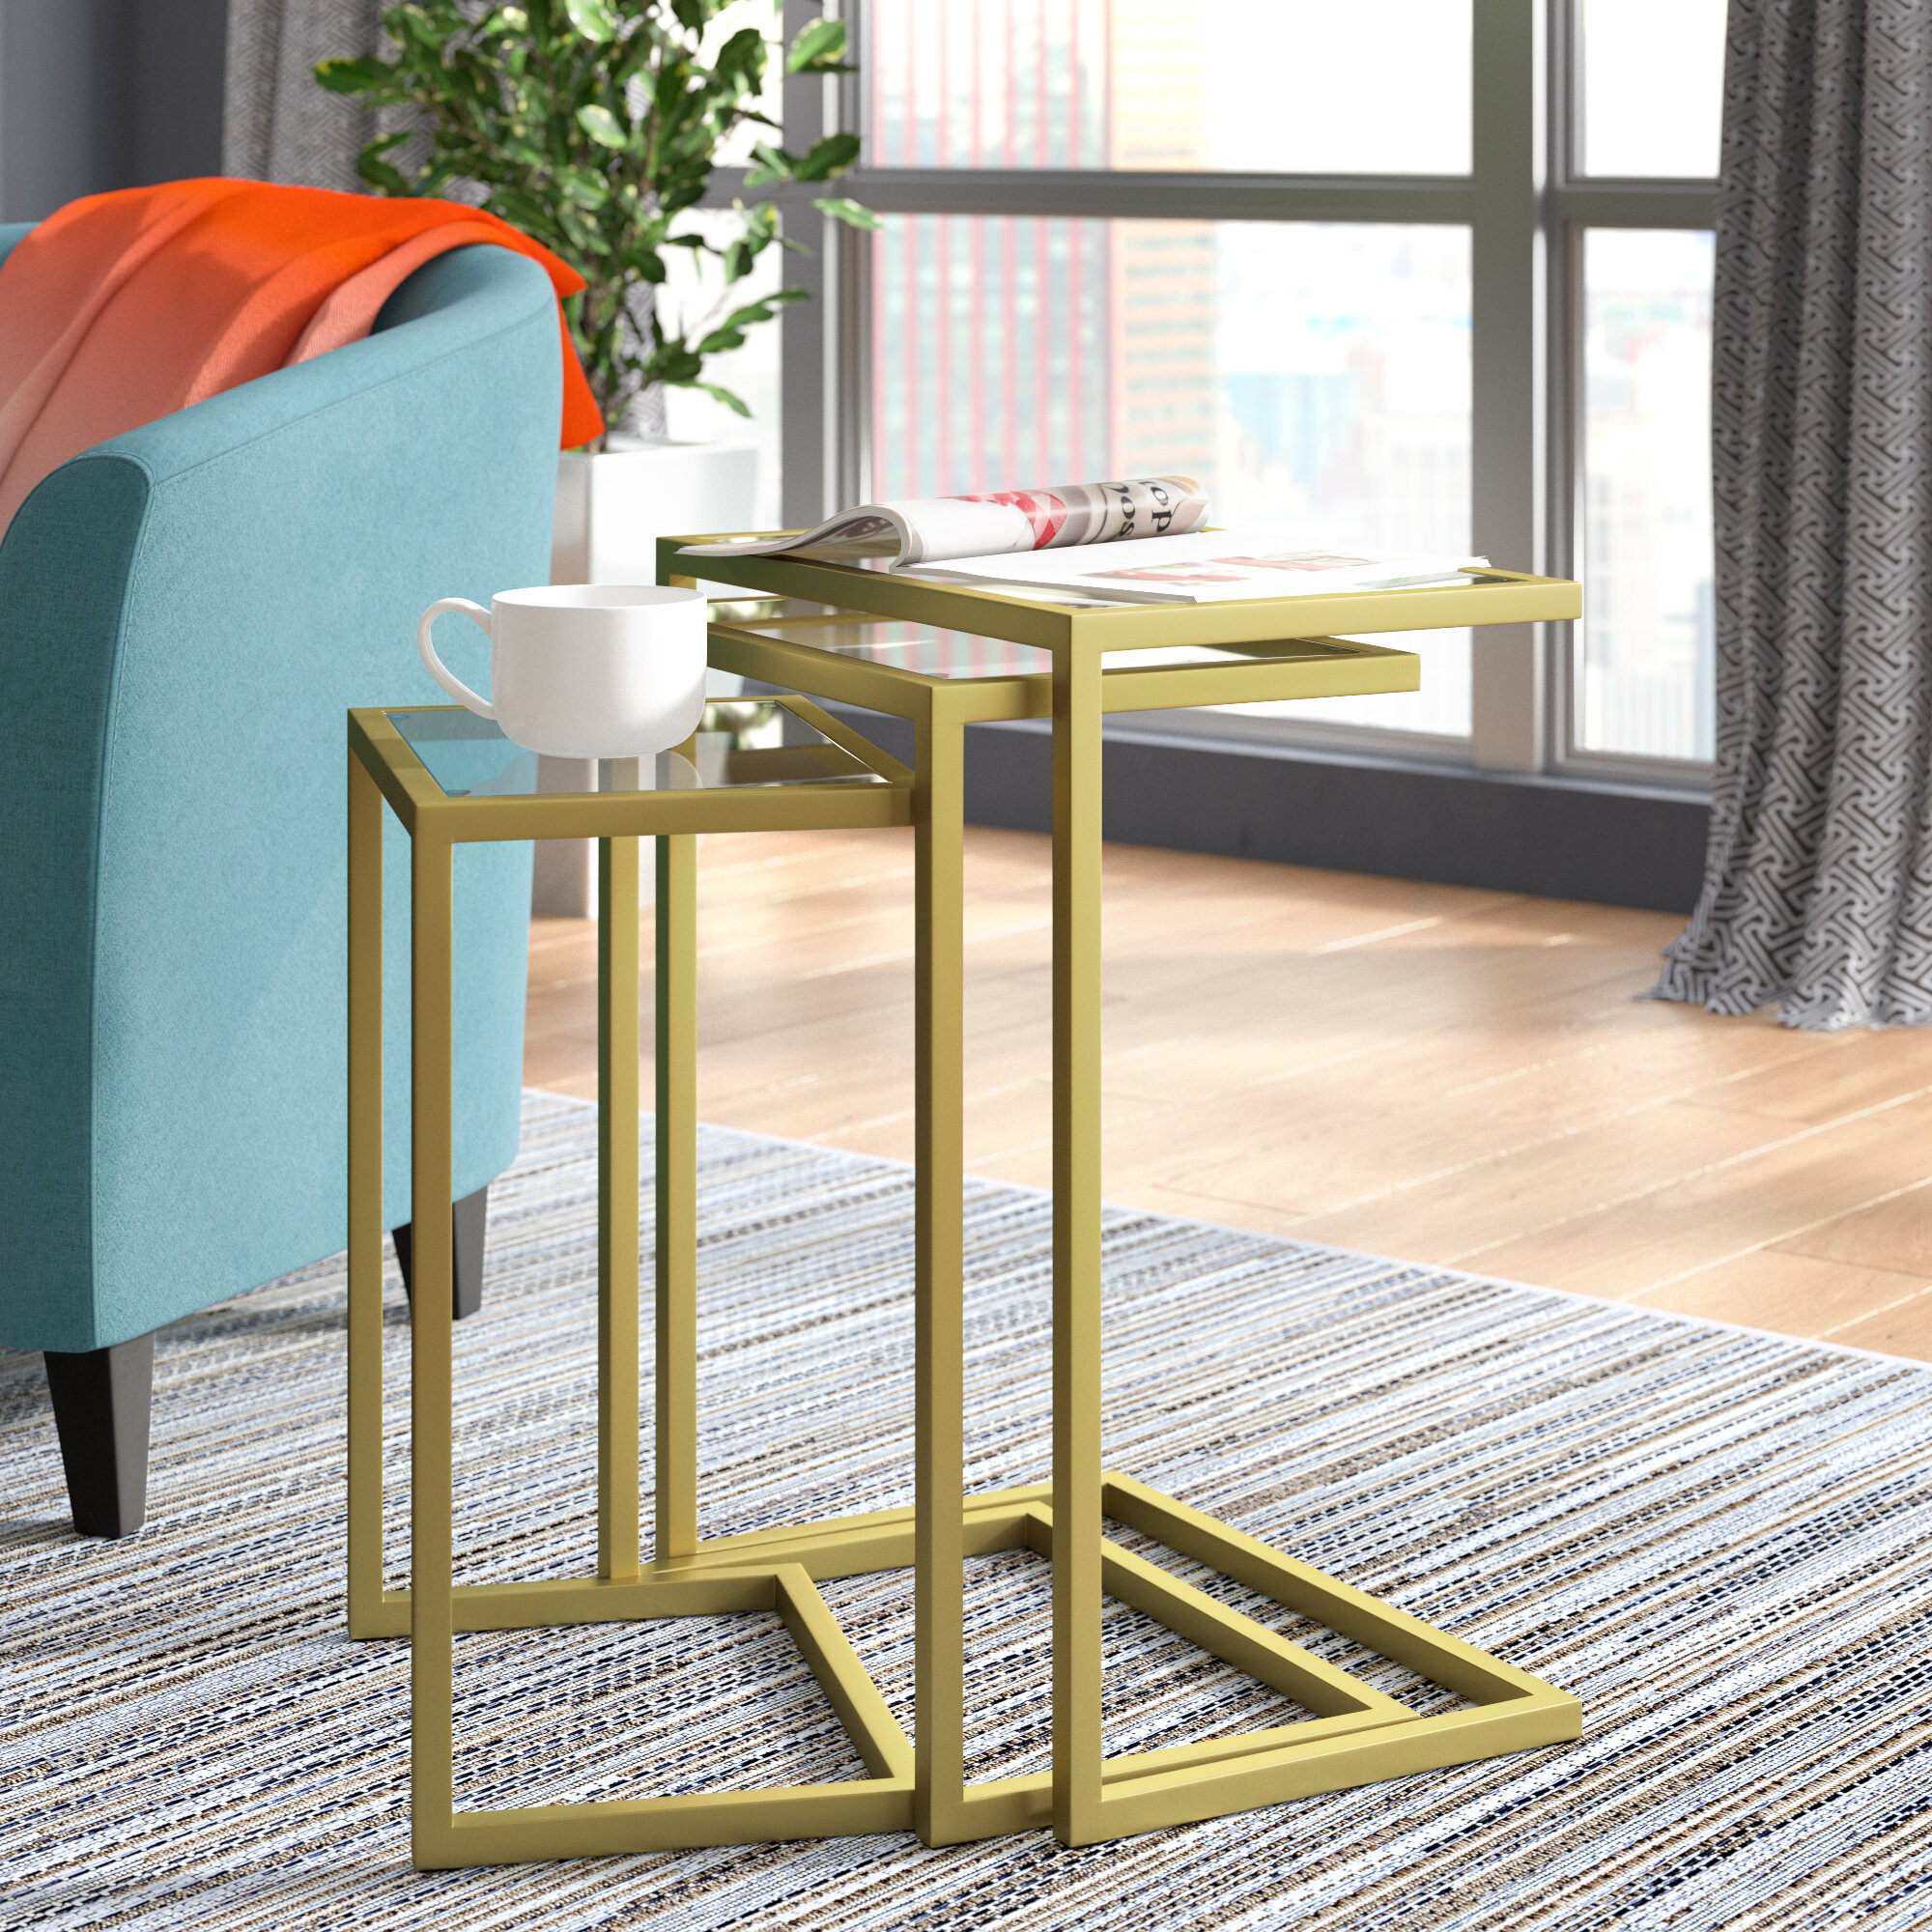 Nest Tables Nesting Tables Nest of 3 Tables with Glass Tabletop Chrome Legs Sofa Side Table End Table Coffee Table Small Table for Living Room Bedroom Reception Room